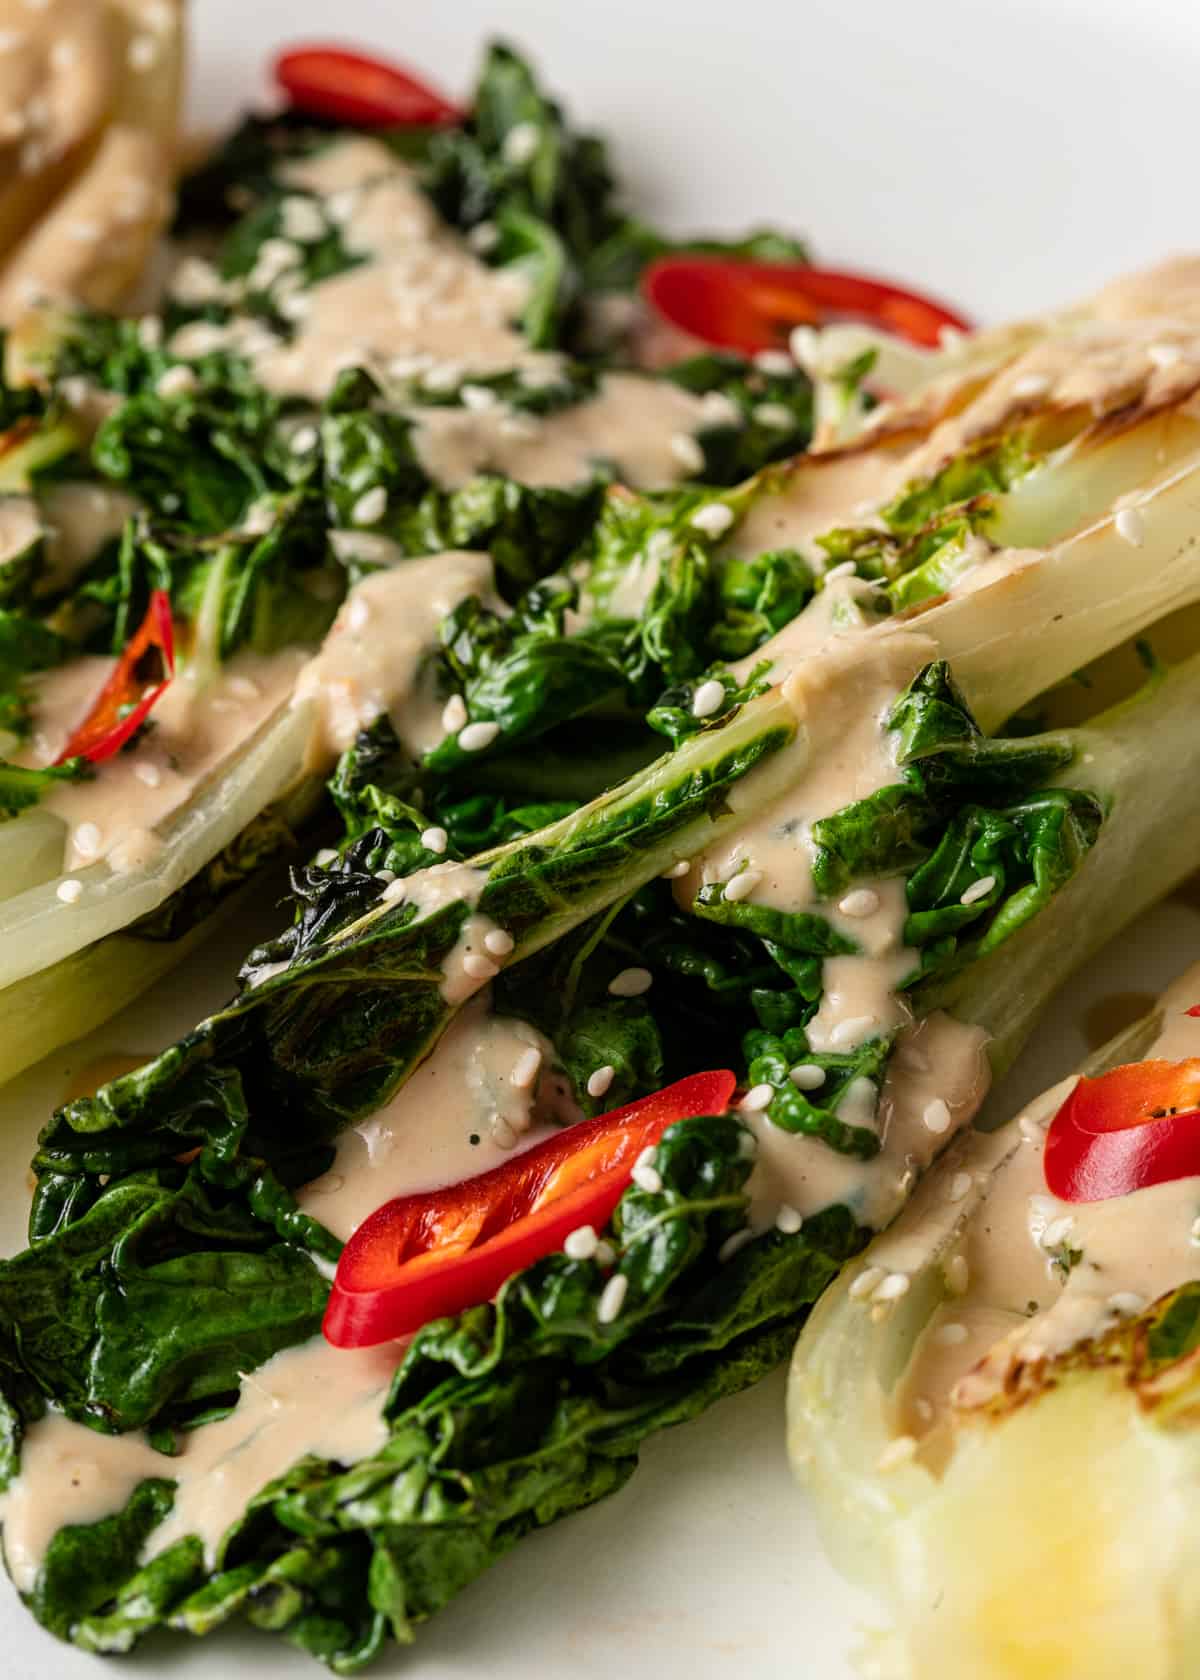 A close up of a salad with greens and small red peppers with miso tahini dressing on top.